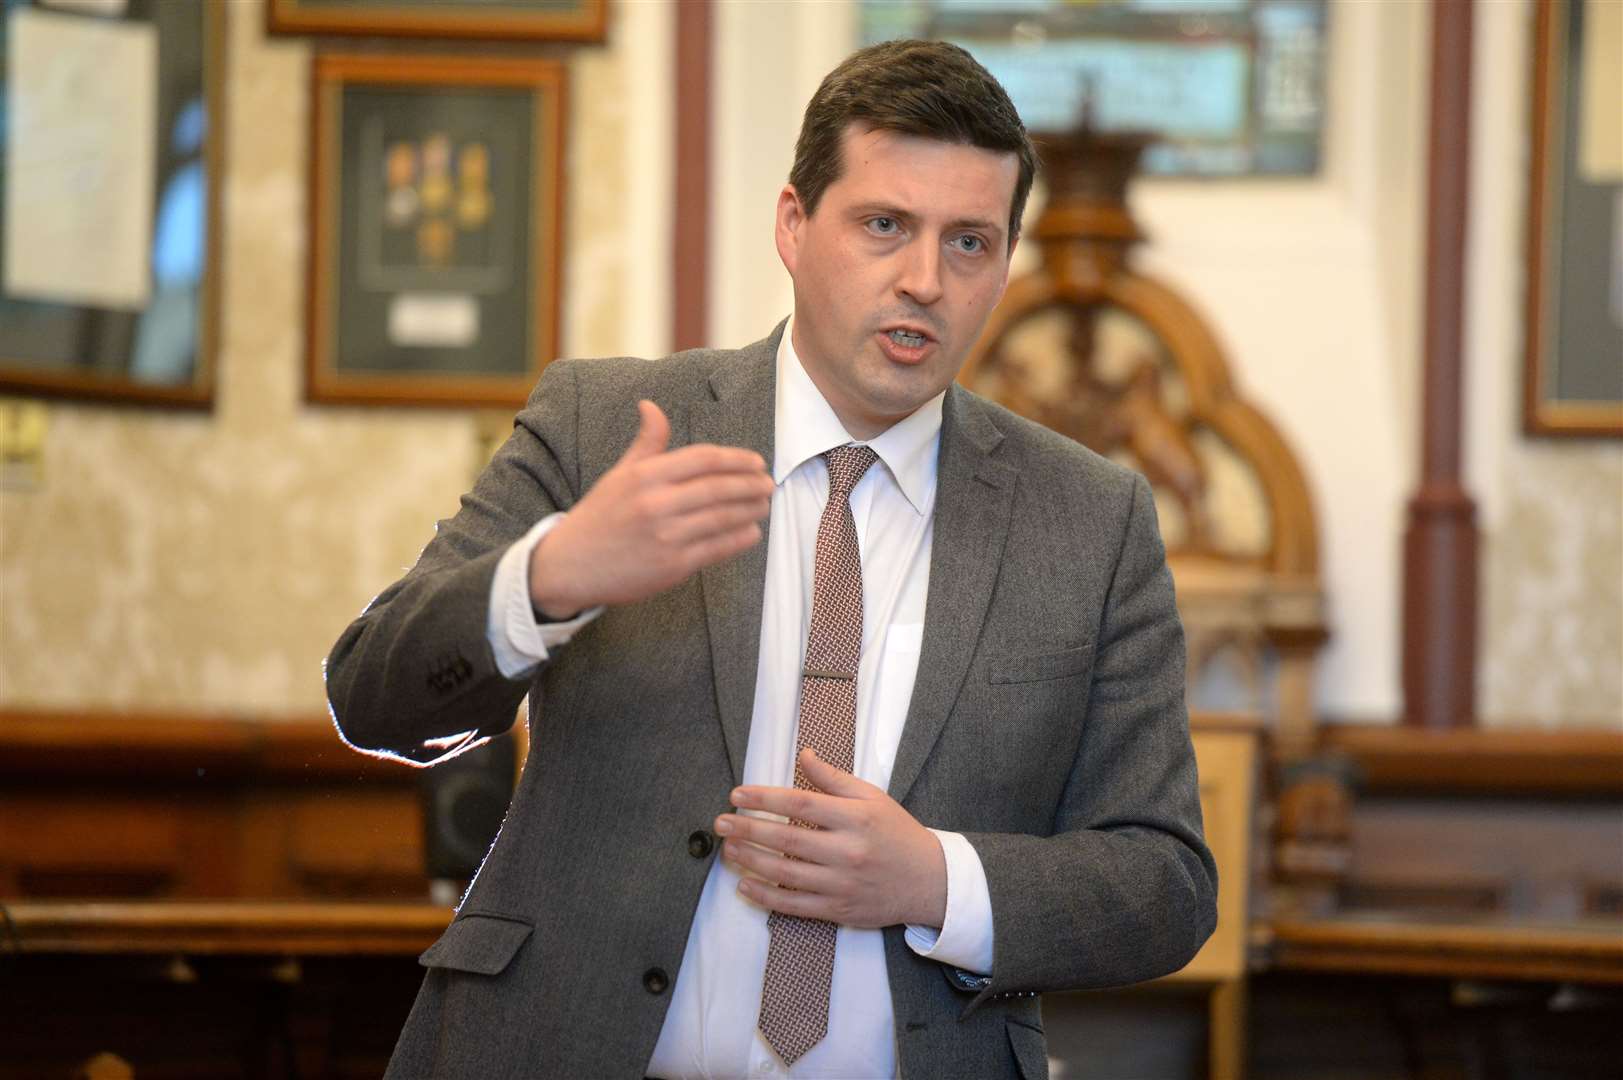 Minister for Business, Fair Works and Skills, Jamie Hepburn.